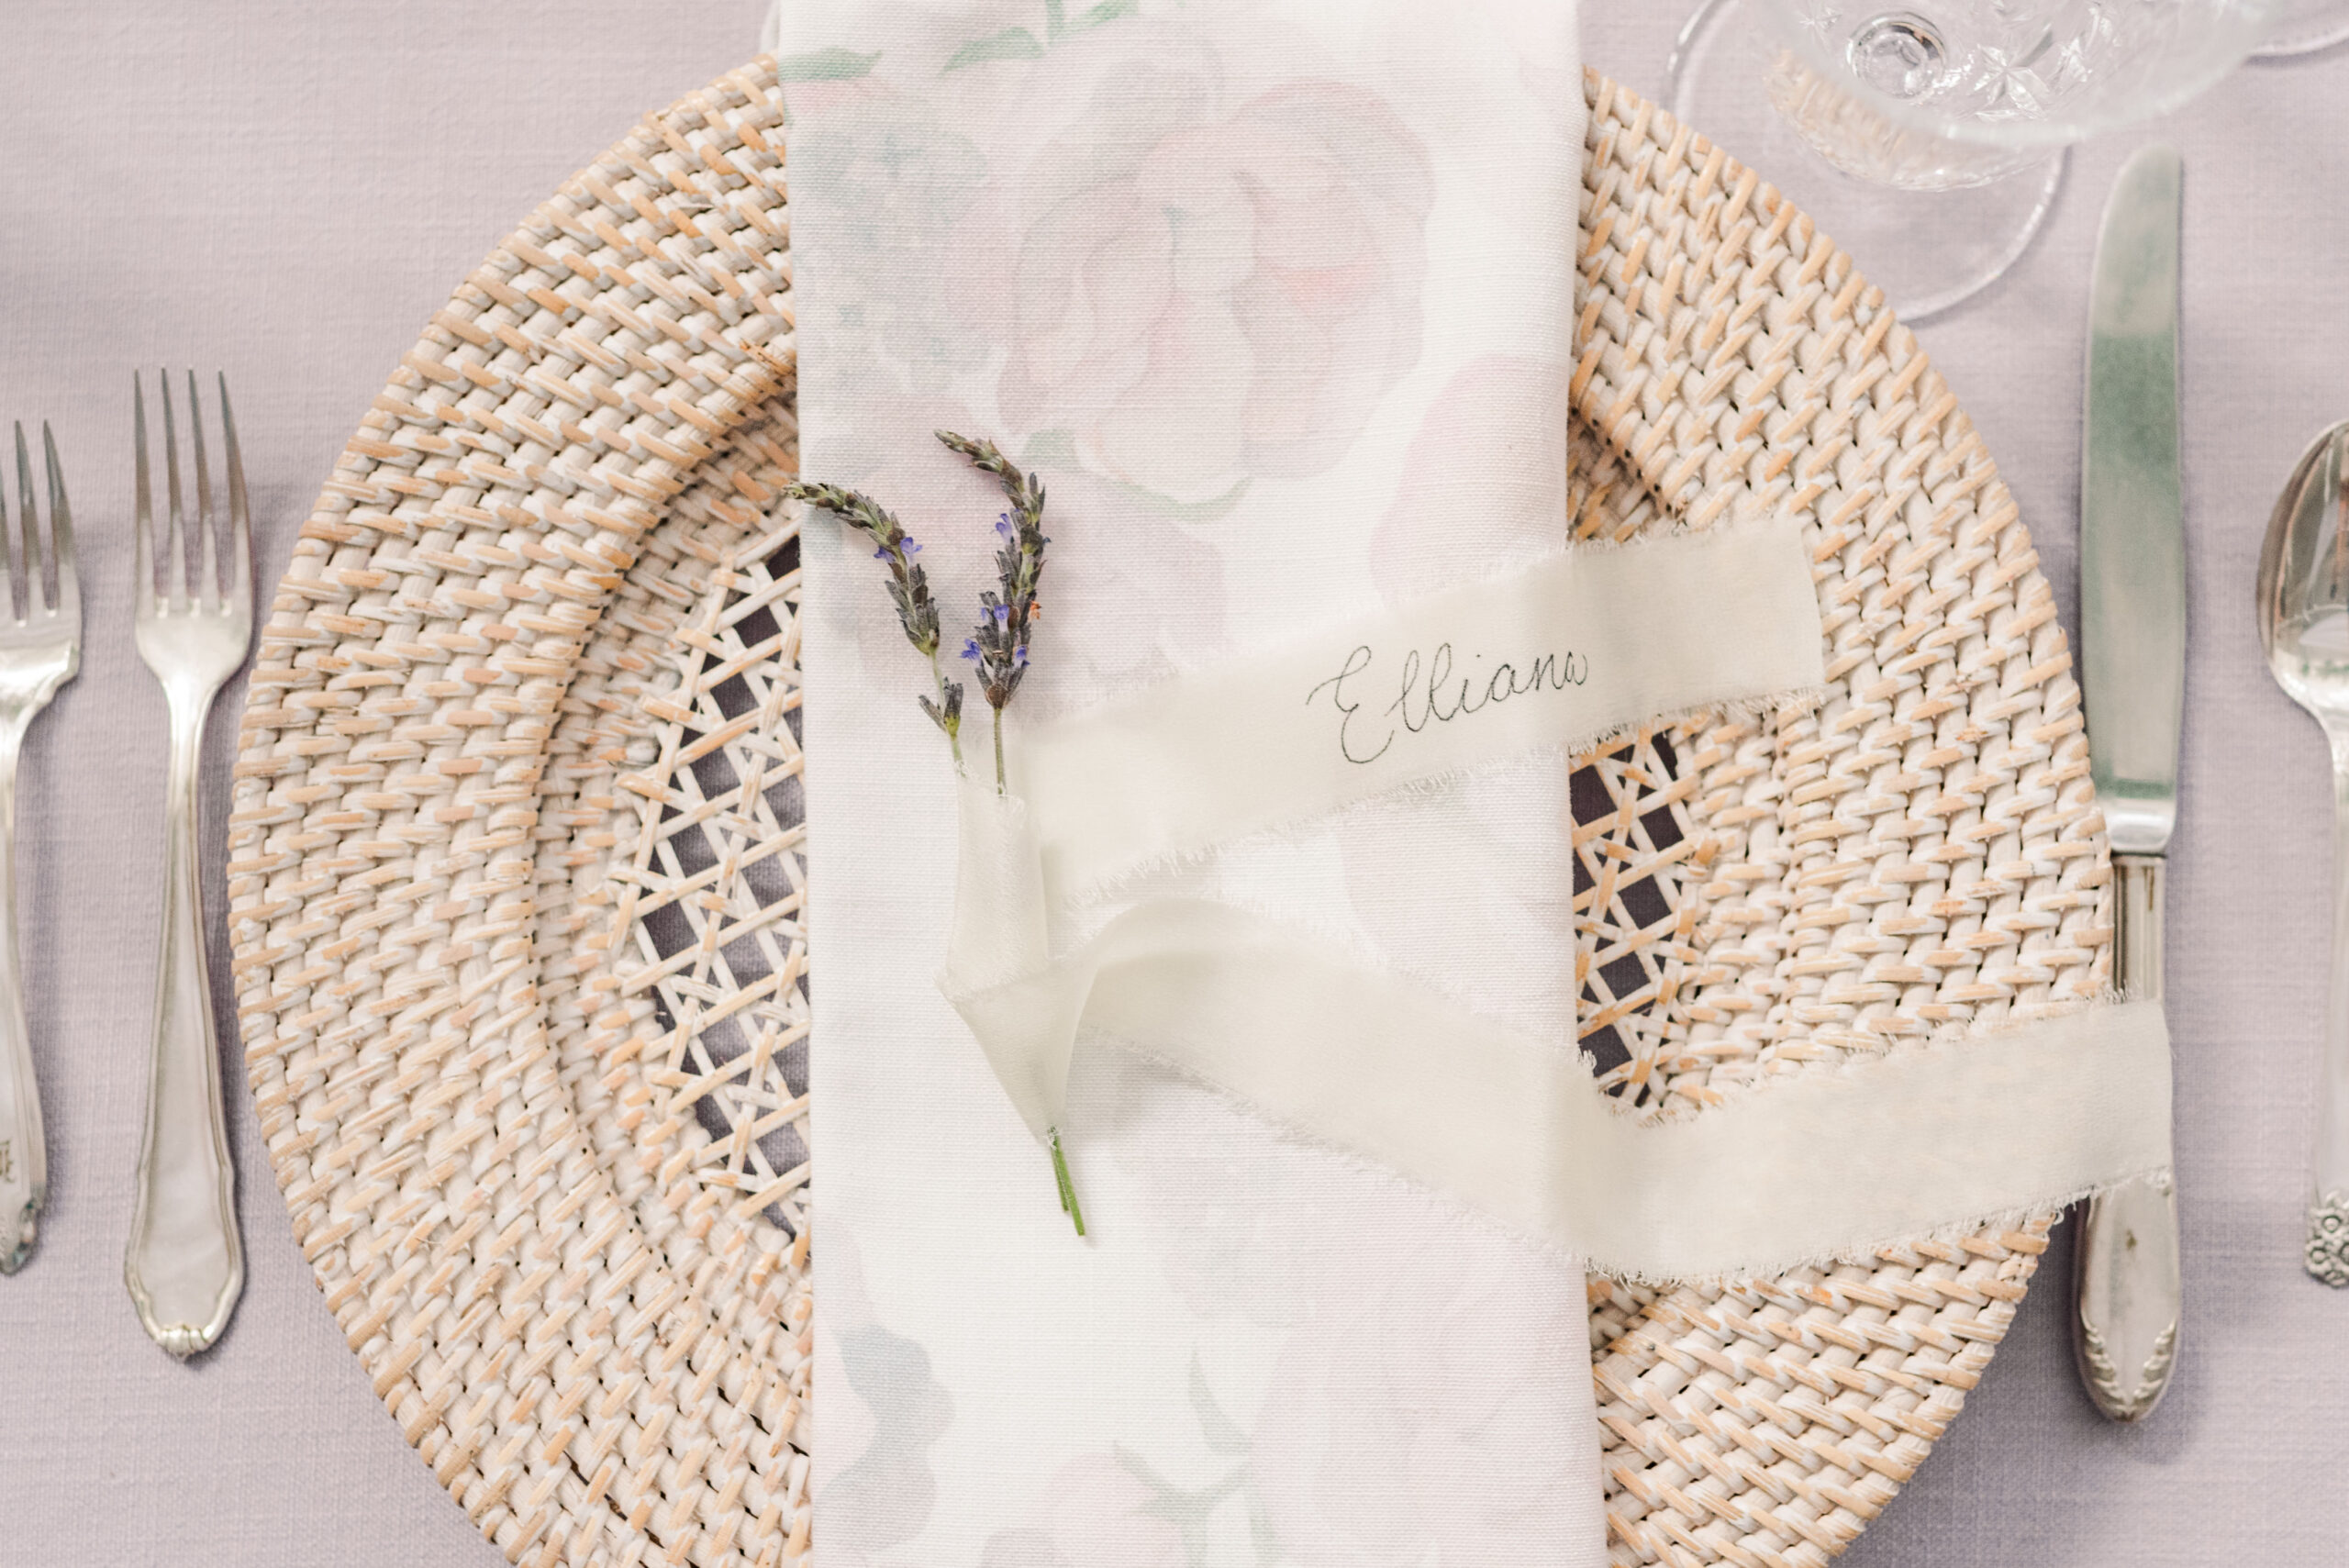 a sprig of lavender sits on top of a white linen napkin, and the napkin rests on a wicker table charger. the photo is used in a blog post about pic-time galleries